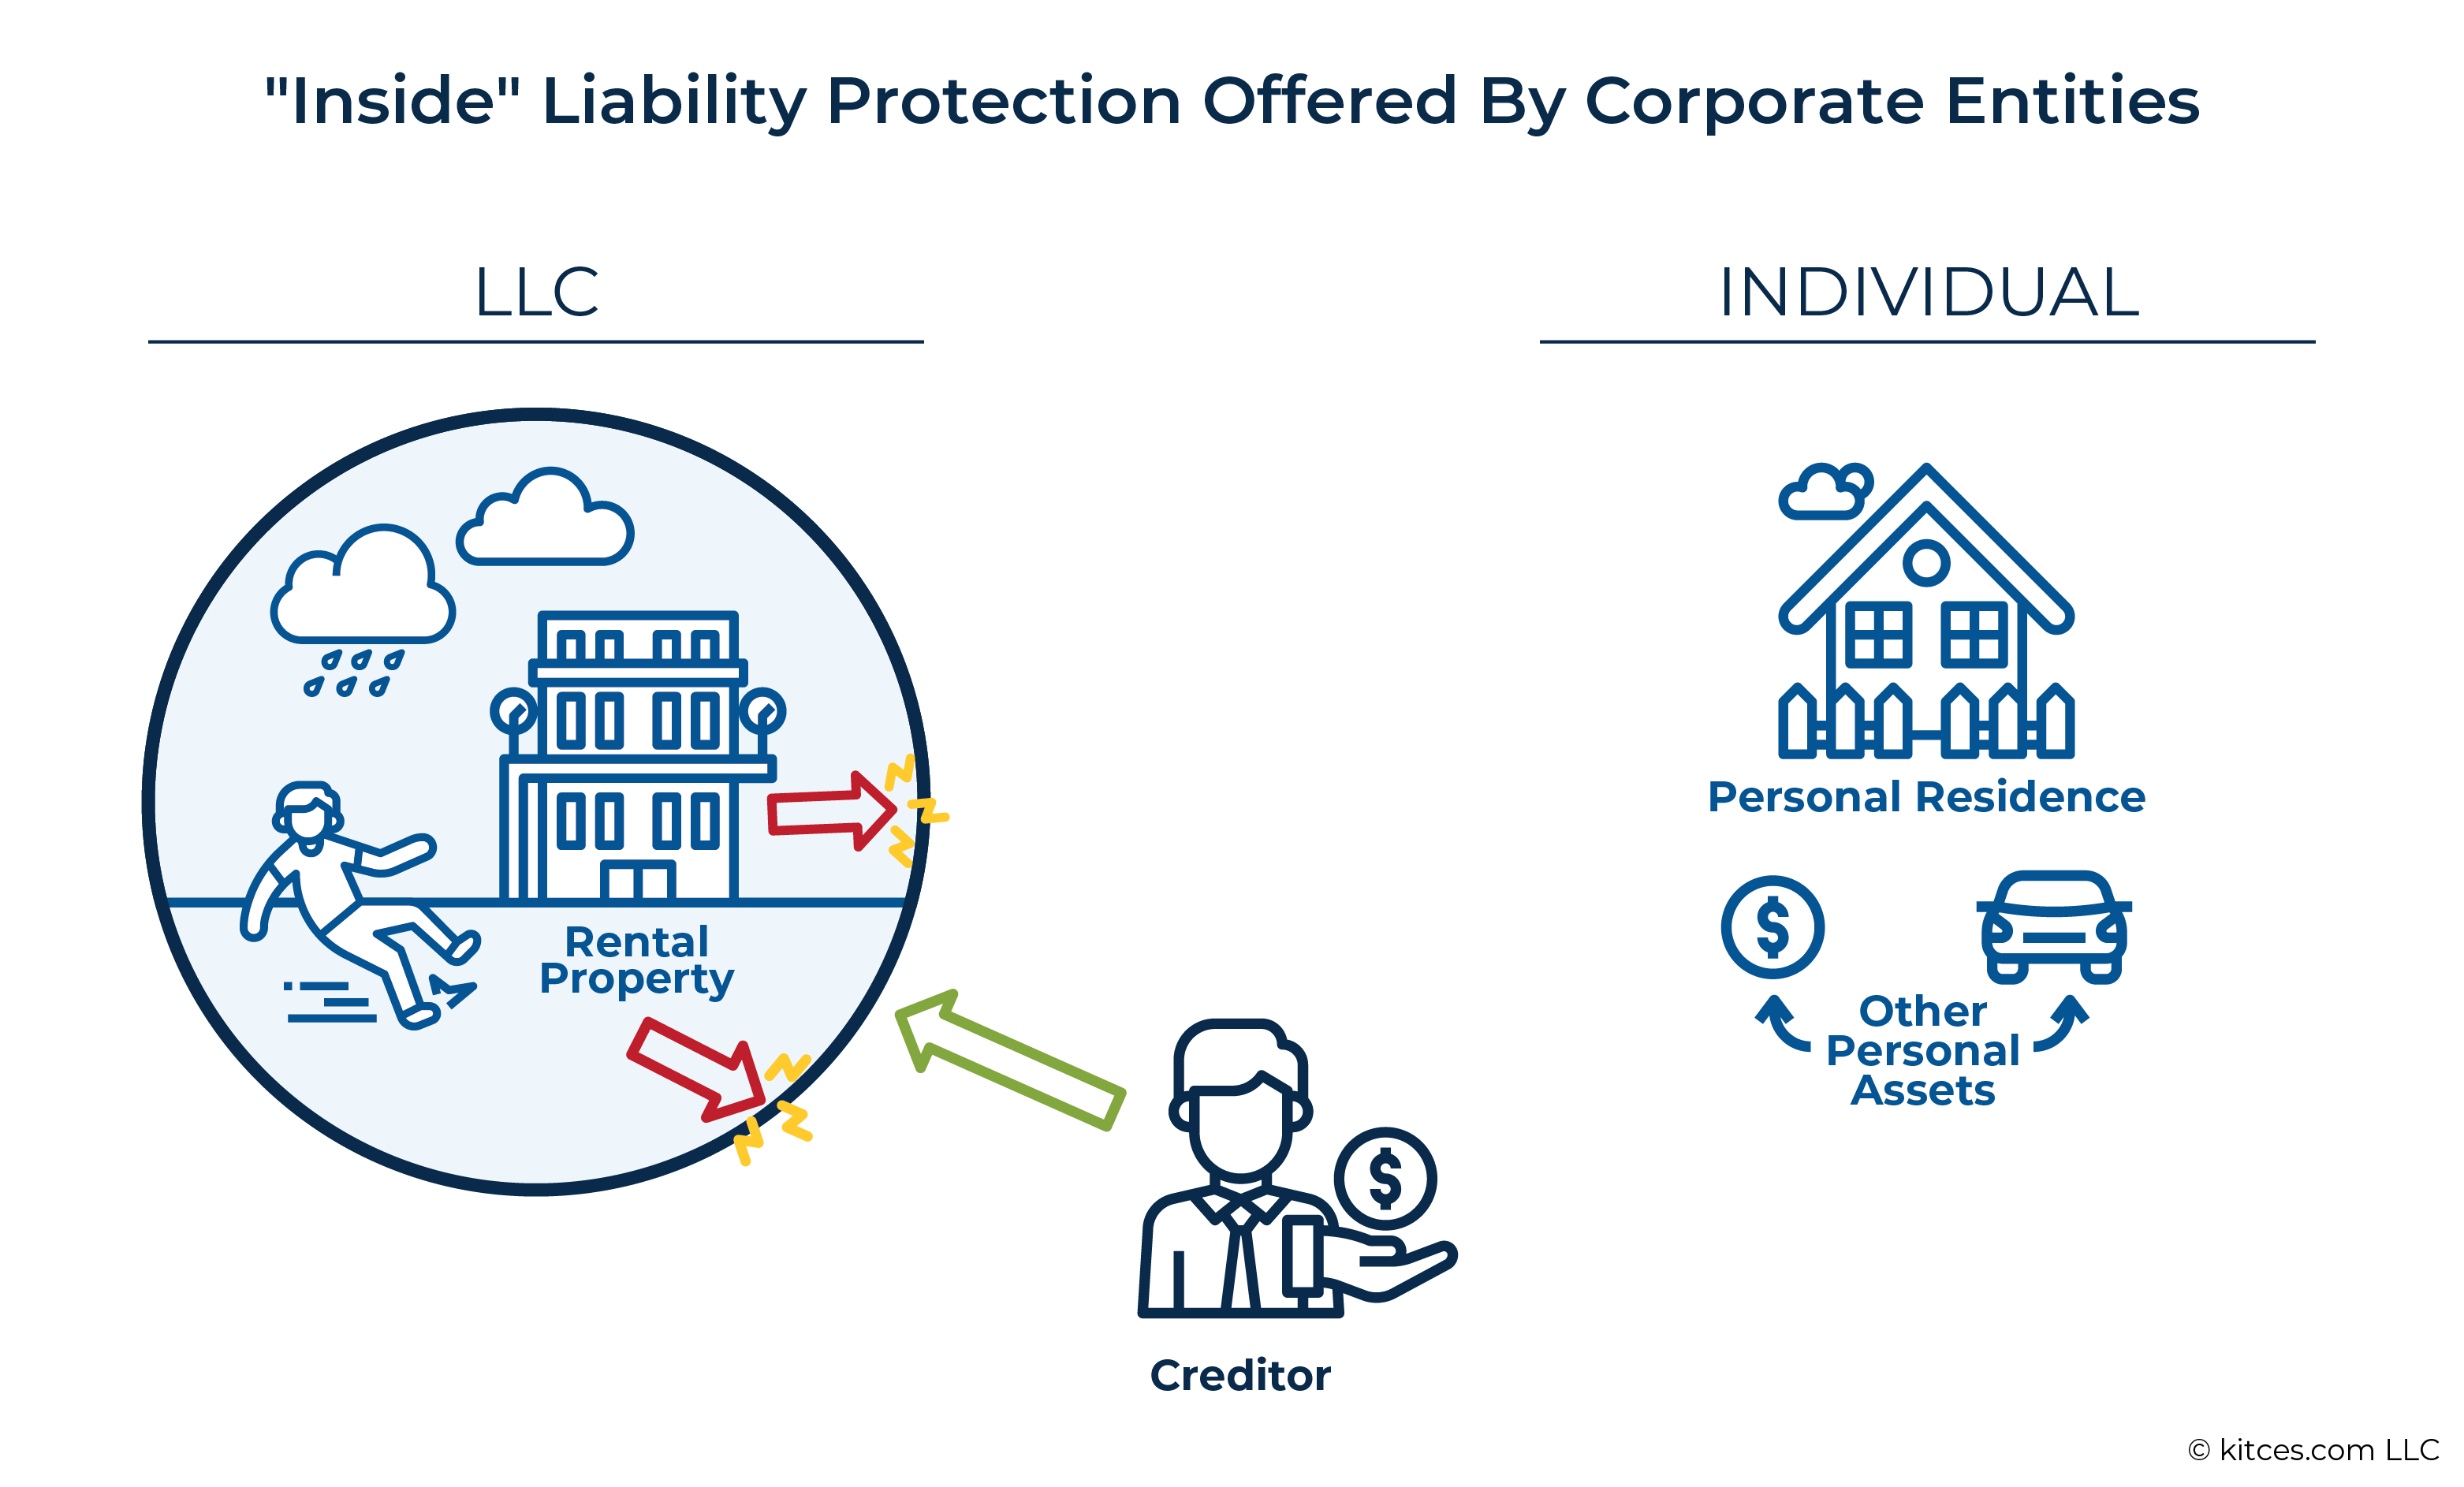 Inside Liability Protection Offered By Corporate Entities